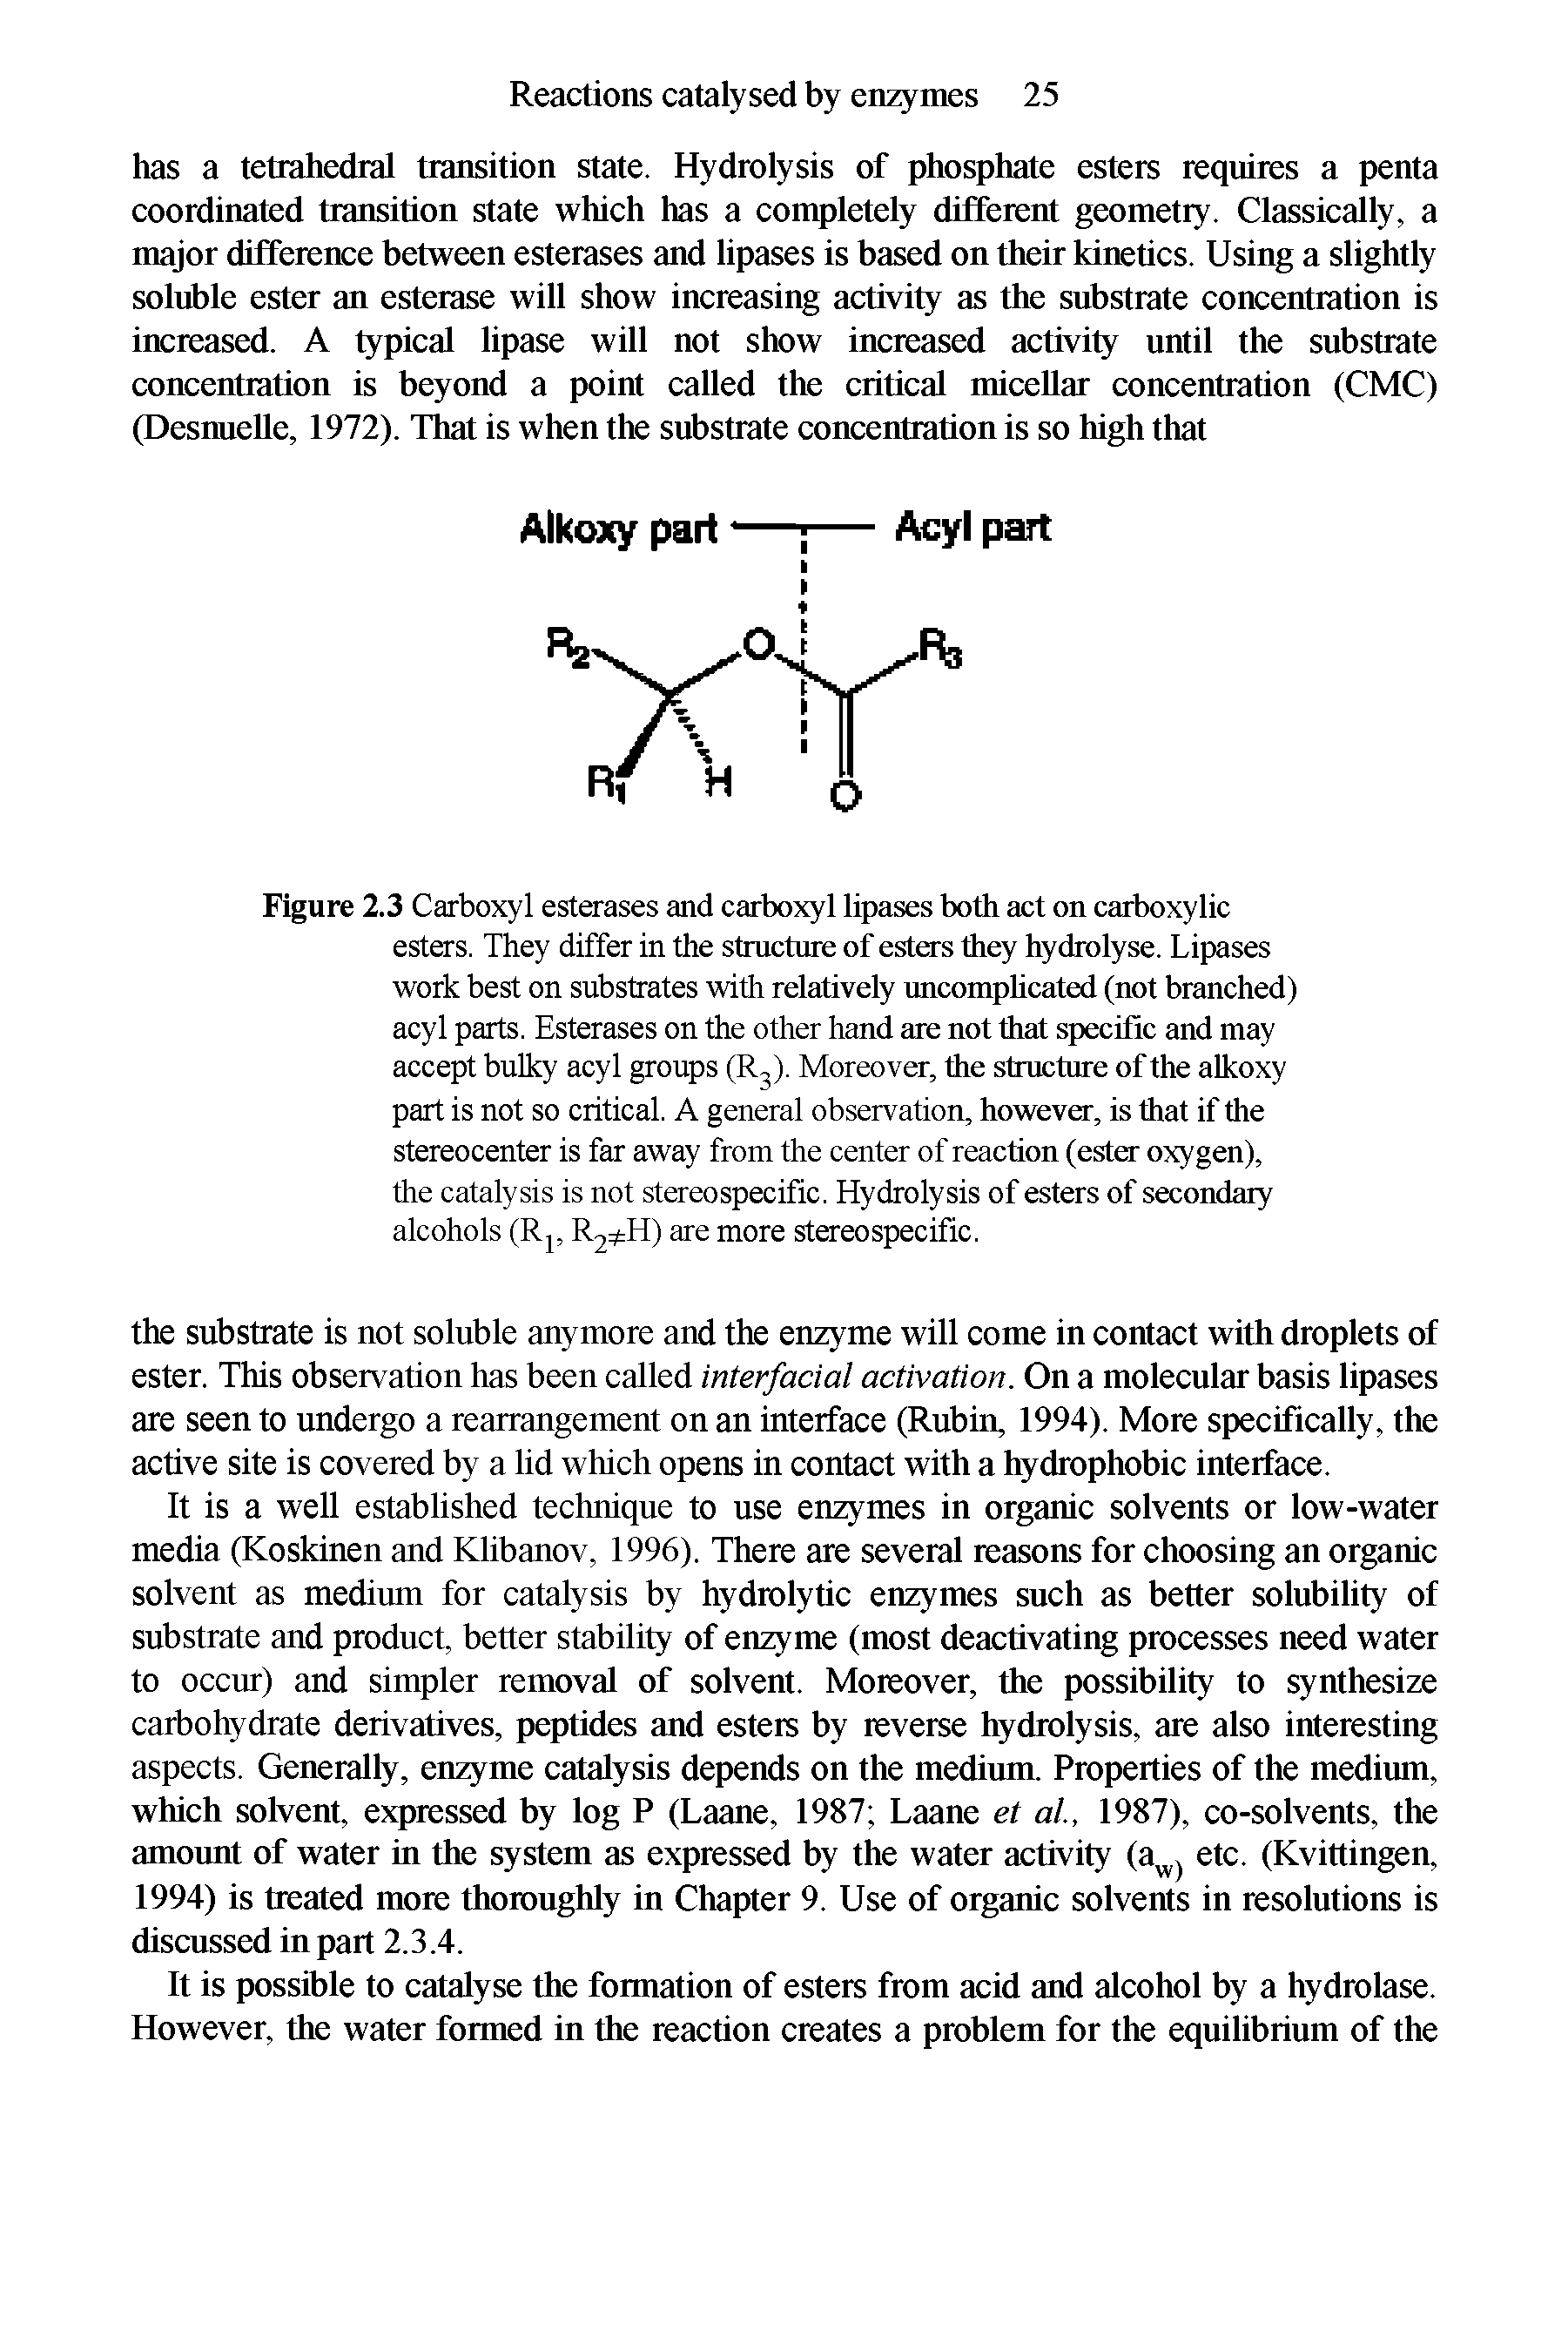 Figure 2.3 Carboxyl esterases and carboxyl lipases both act on carboxylic...